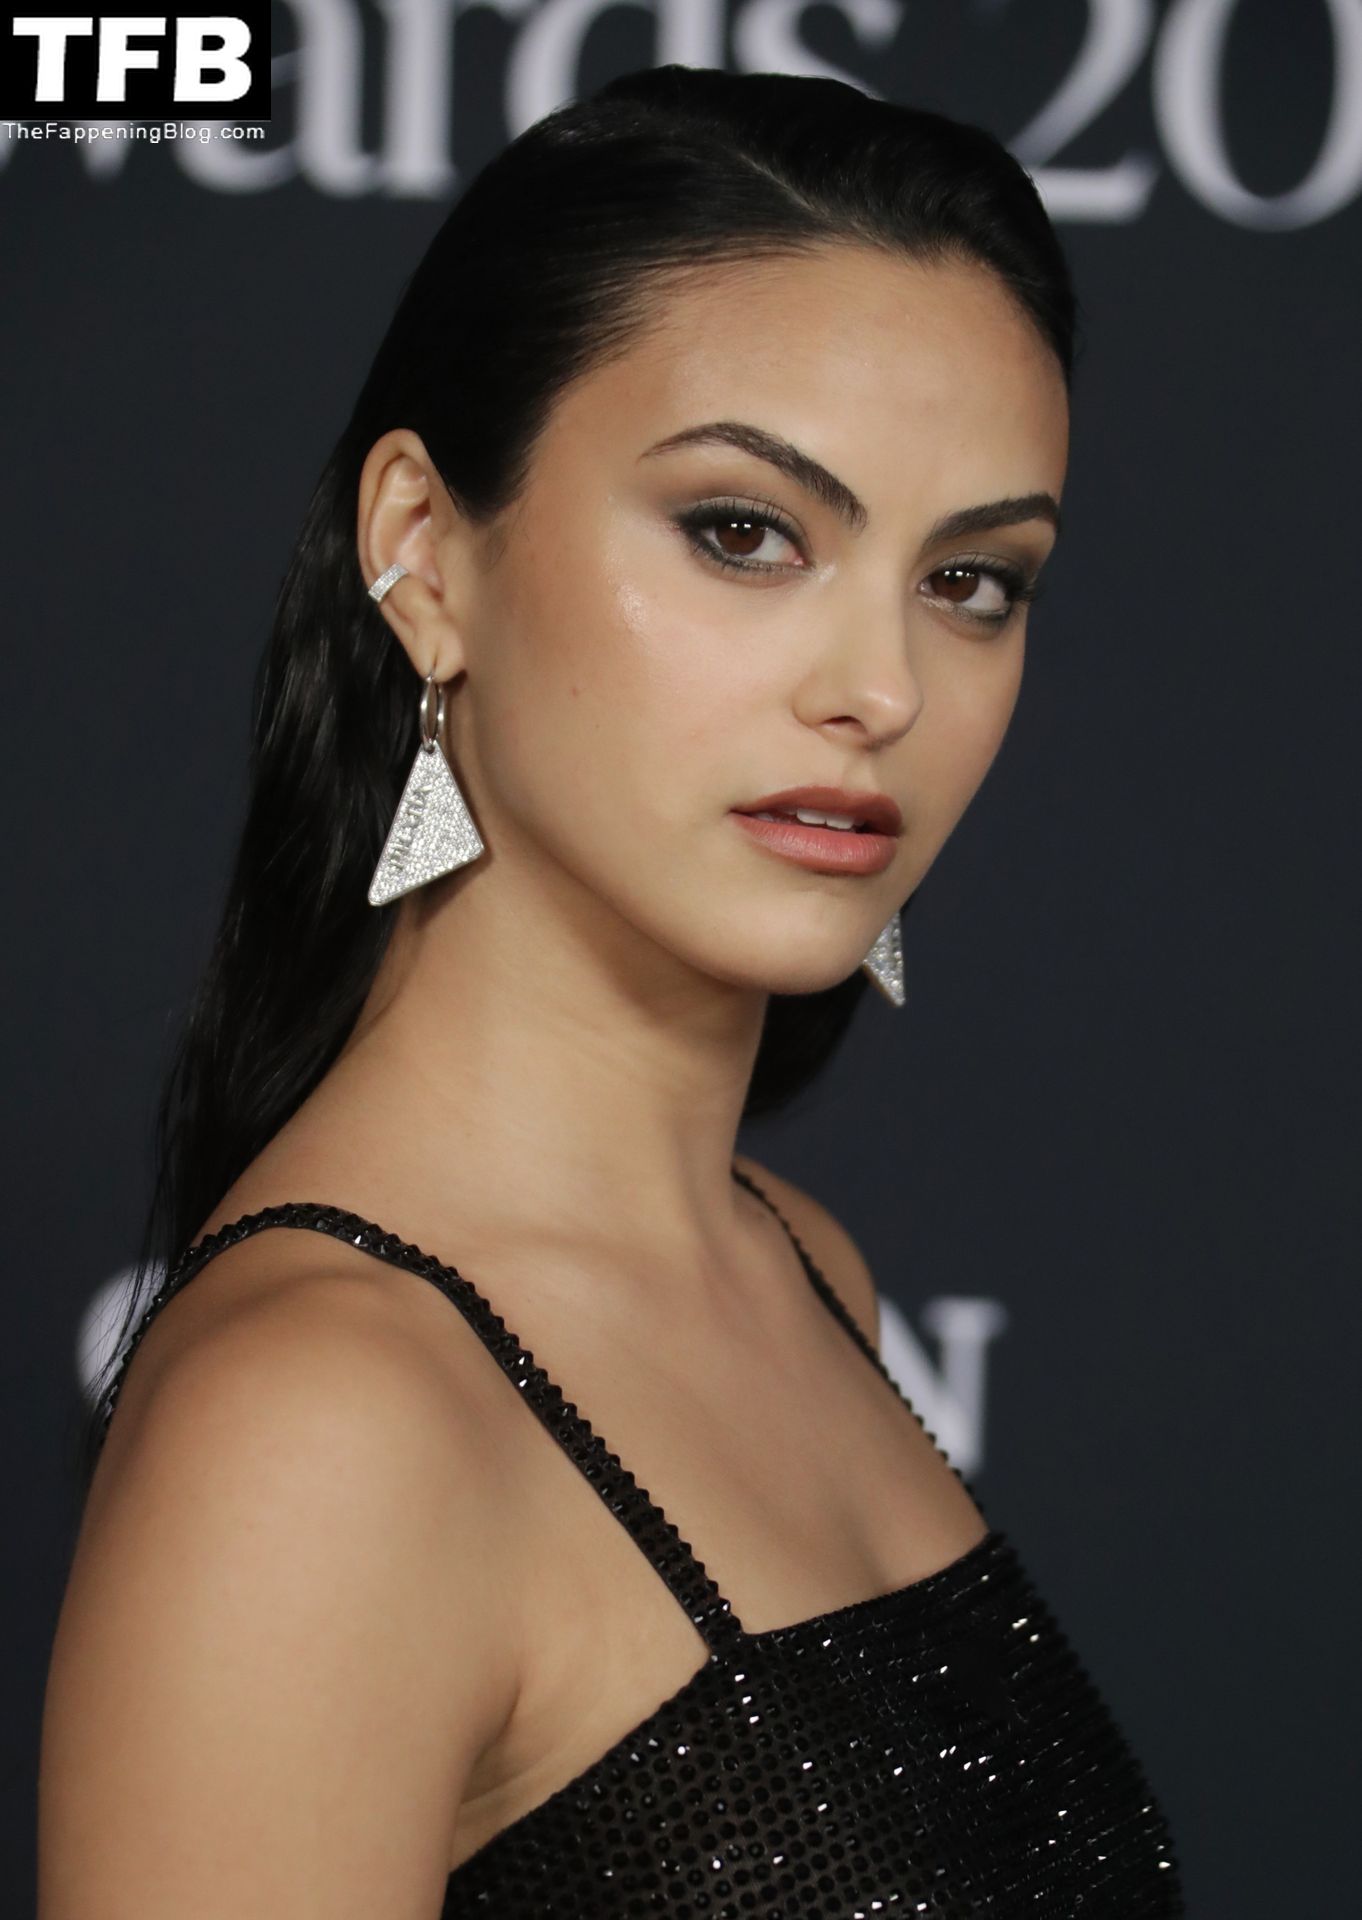 Camila-Mendes-See-Through-Tits-The-Fappening-Blog-93.jpg